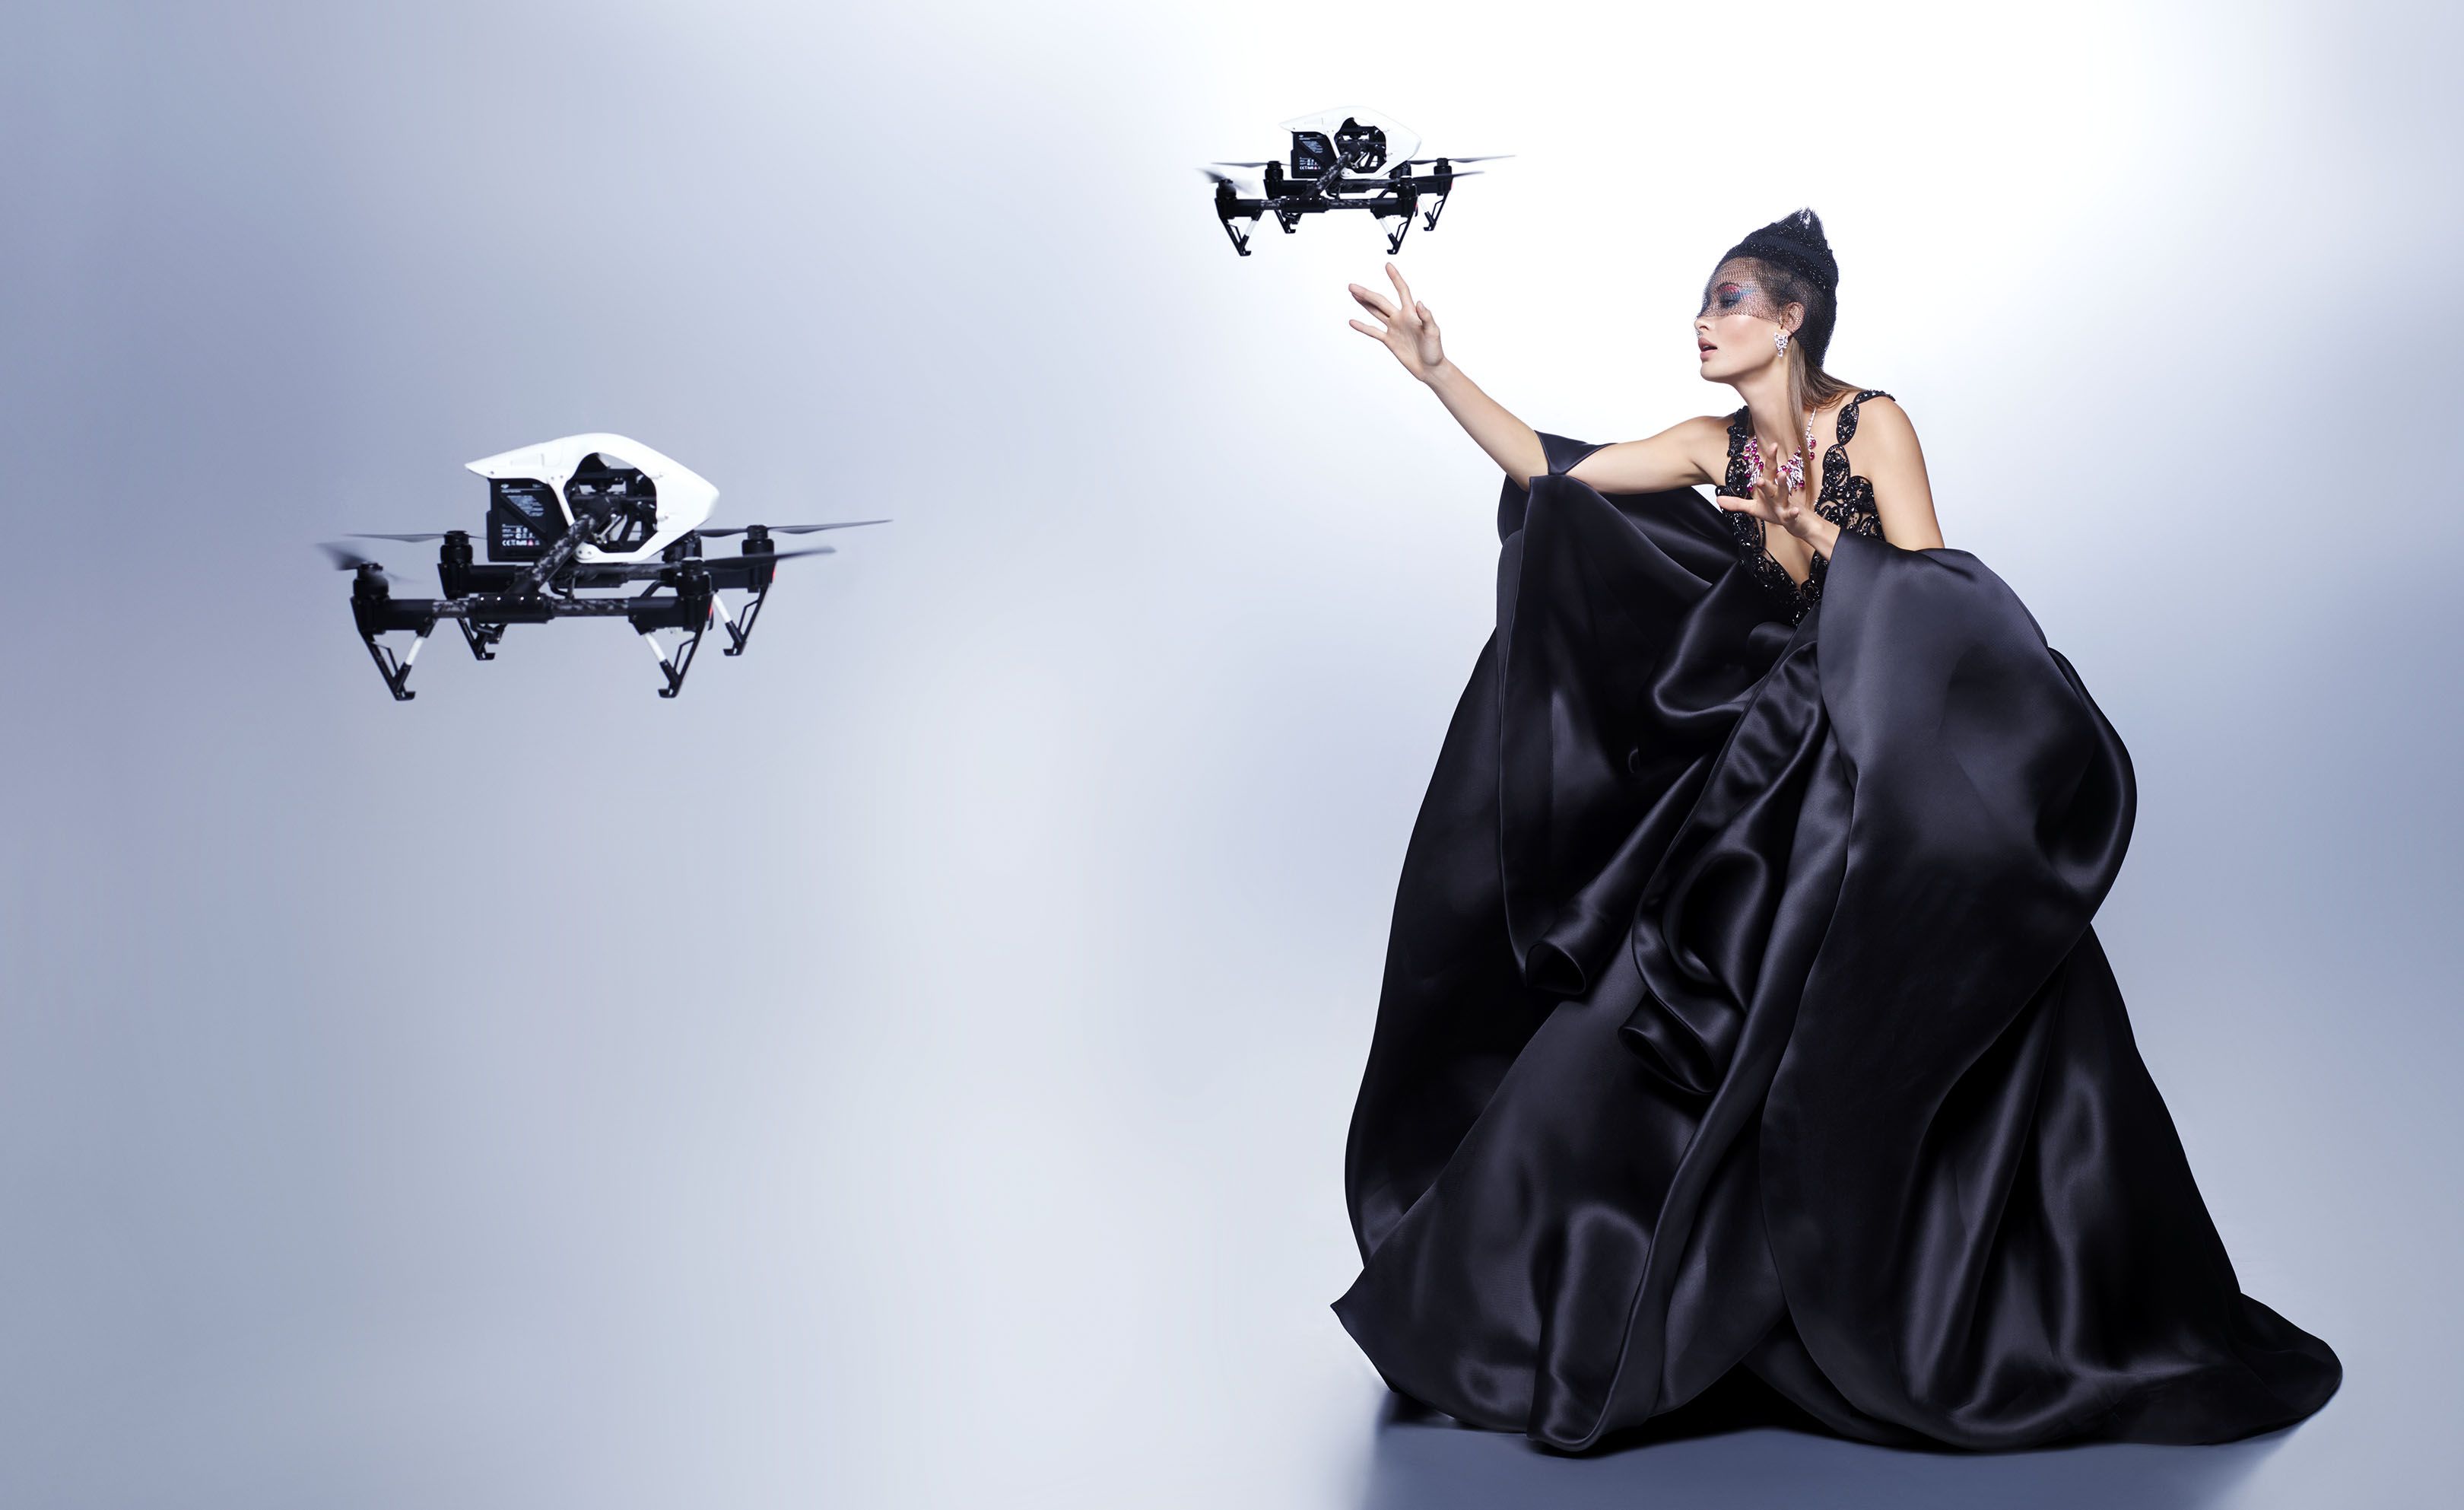 Superficie lunar ballet Ortodoxo Karl Lagerfeld Shoots Drones and Dresses - Couture Dresses and Drones